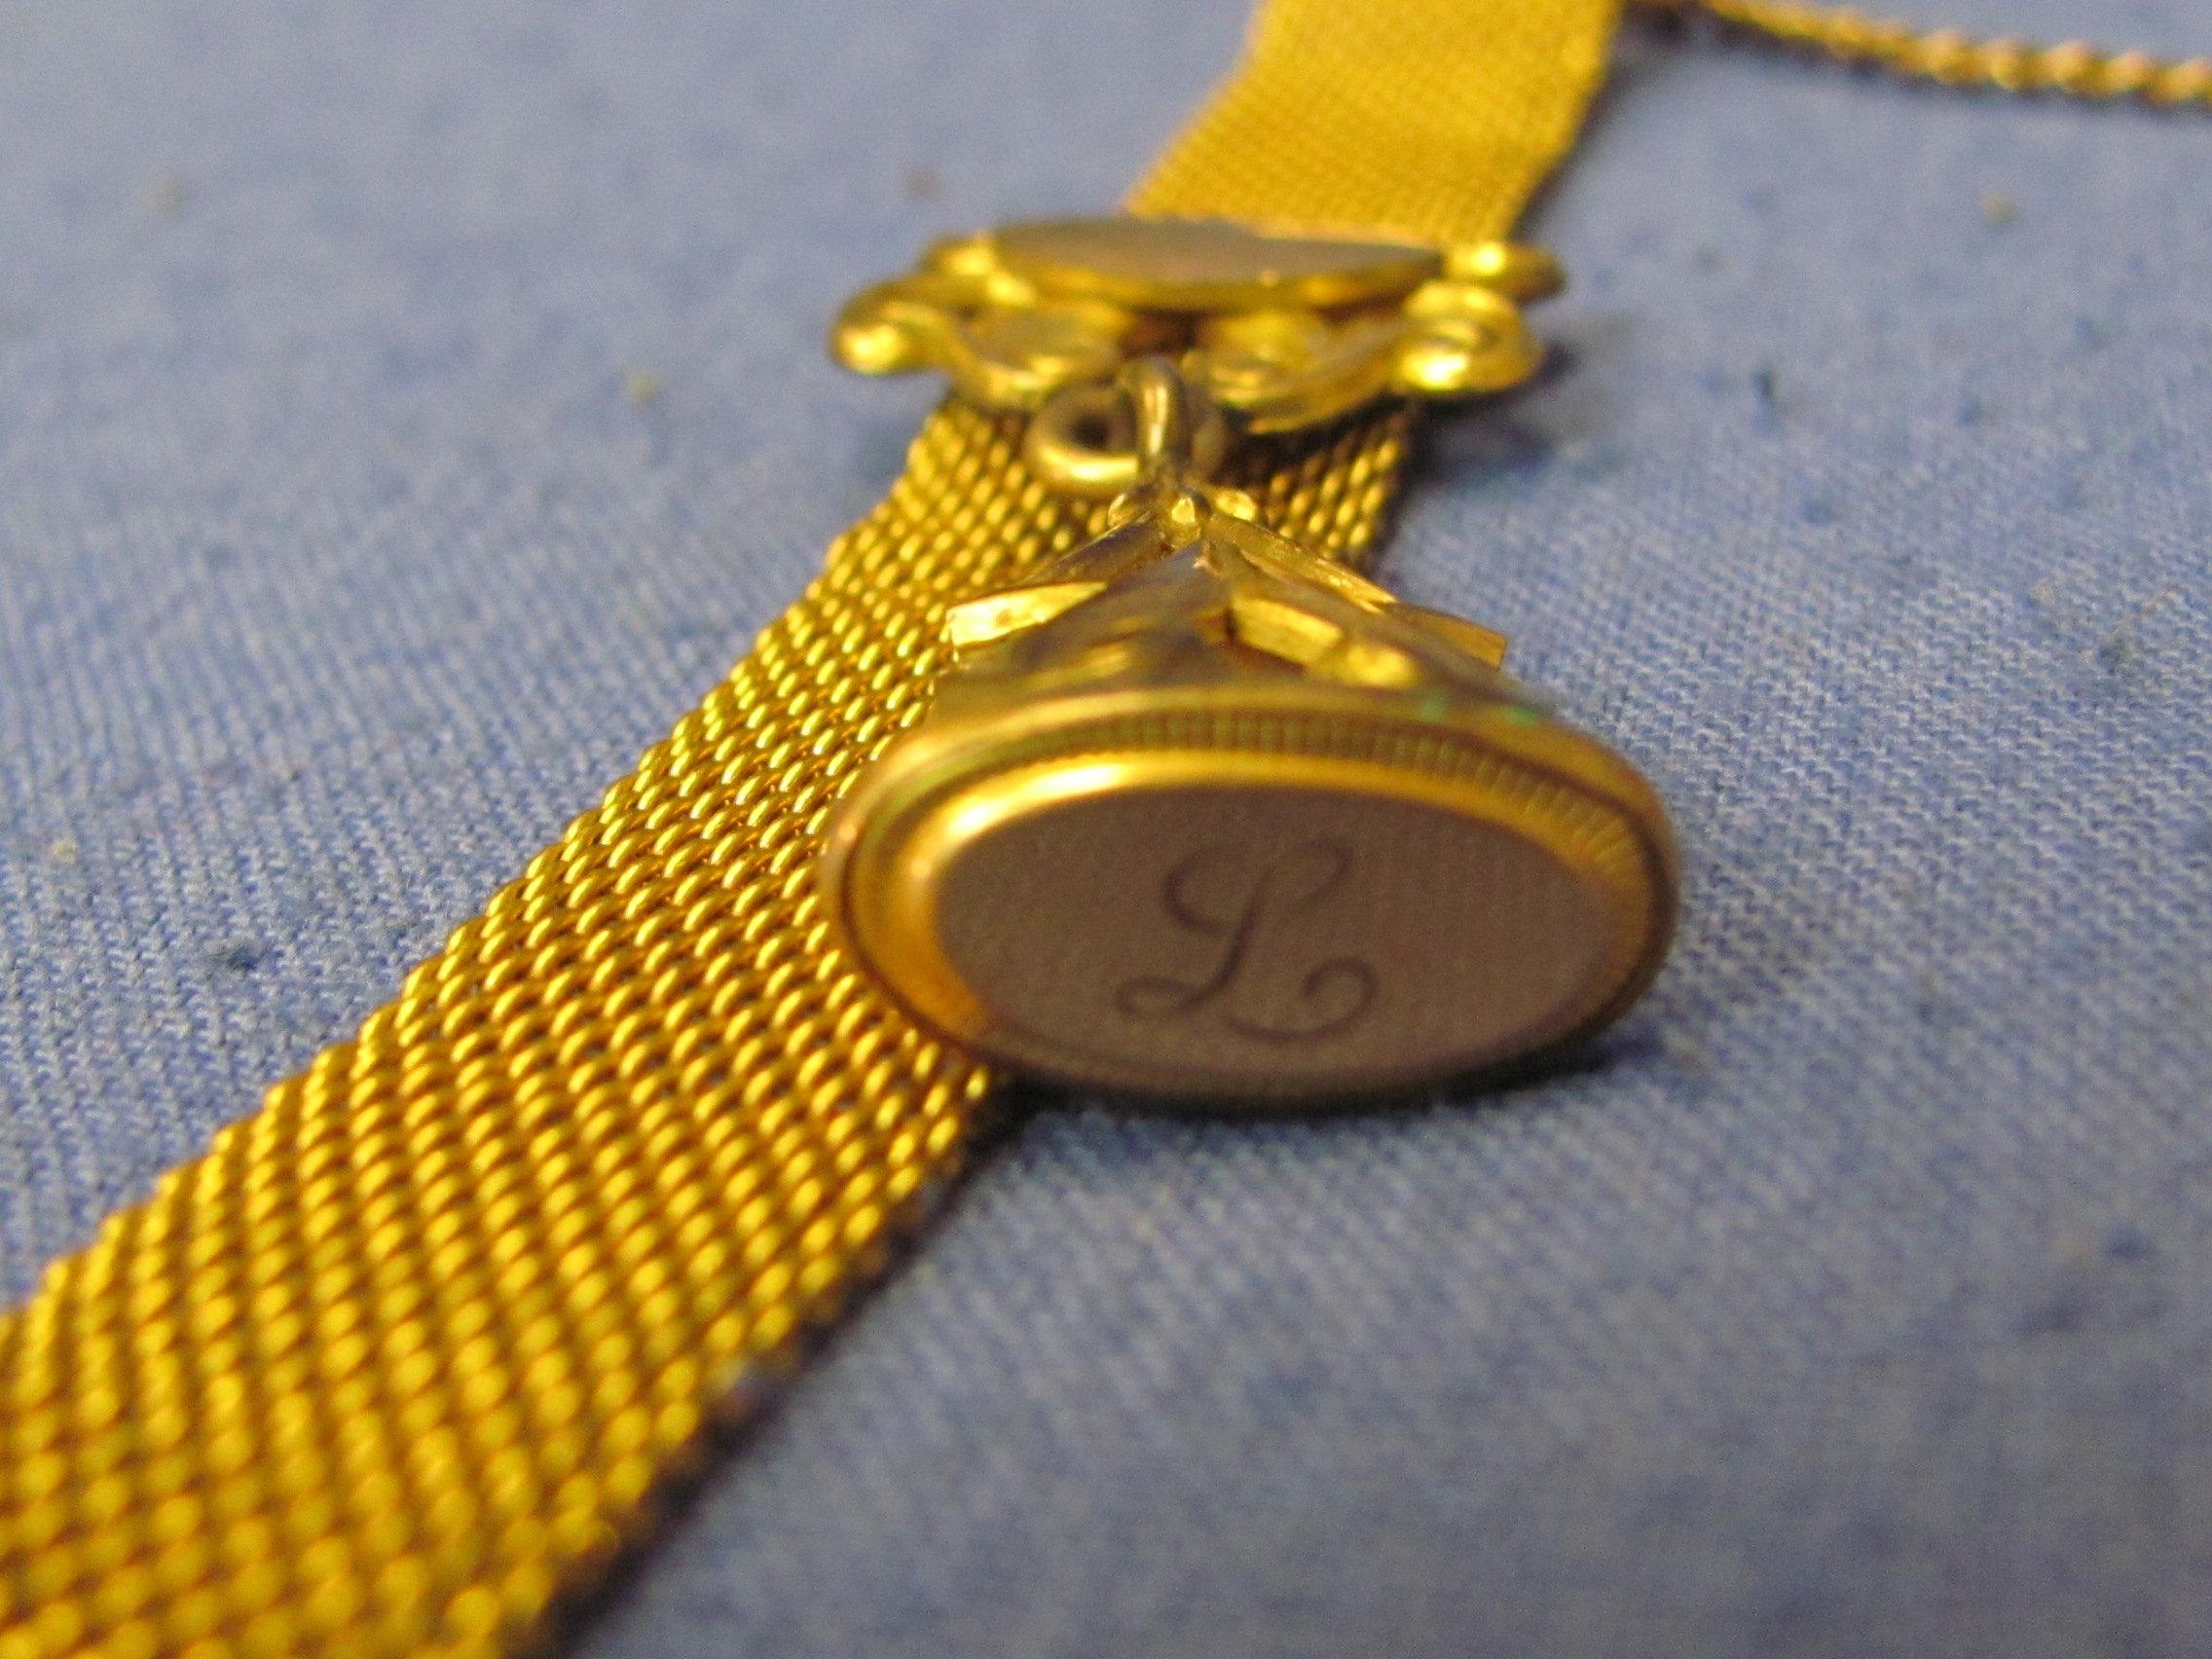 Antique Gold Plate Watch Fob & Chain – Engraved “L” - signed “Marathon” - 4 1/2” long